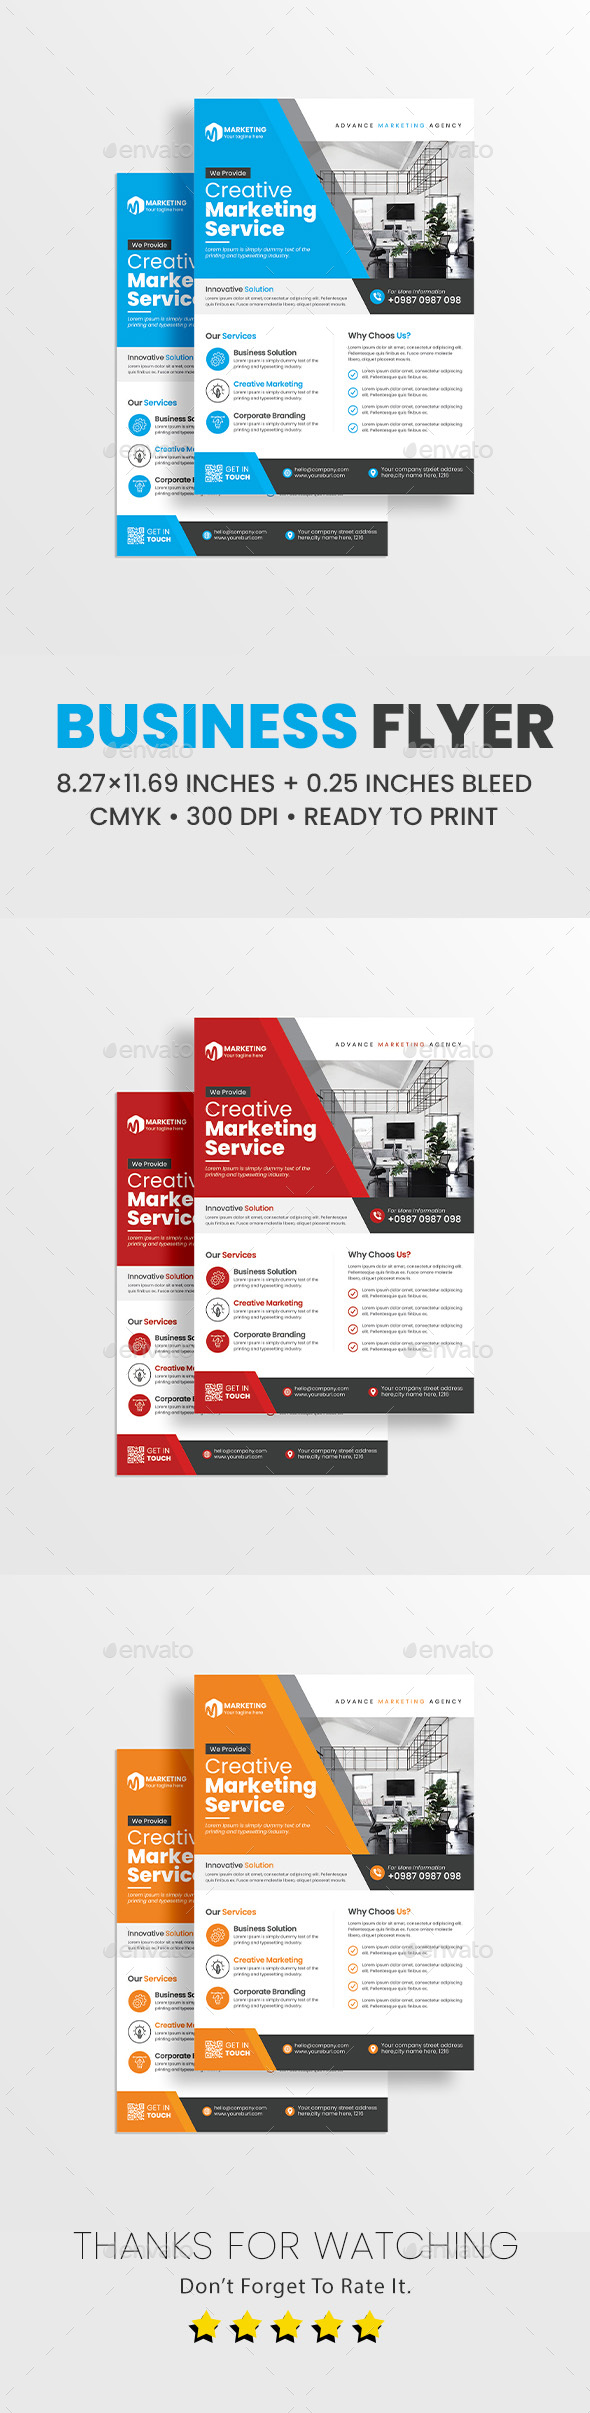 [DOWNLOAD]Corporate Business Flyer